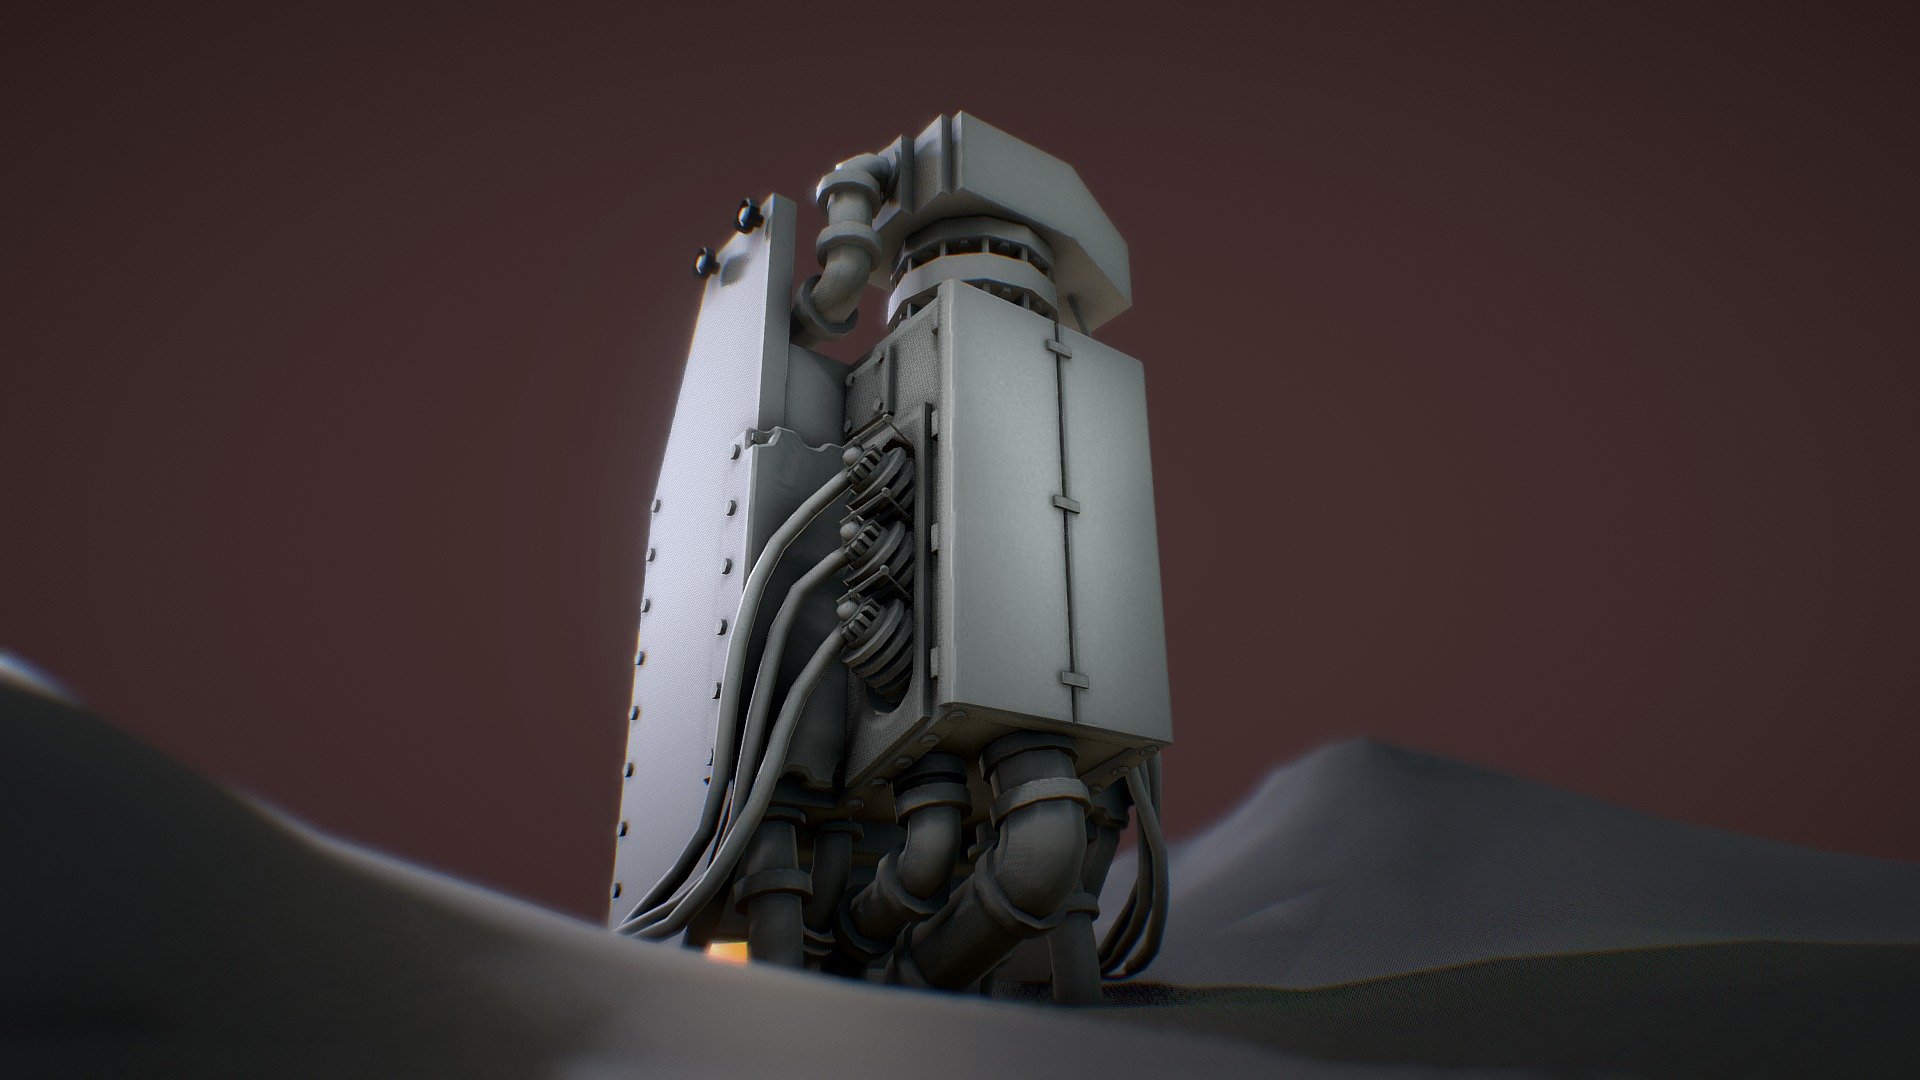 -Sketchfab Challenge: Low Poly Dieselpunk- 
This is my entry for the Dieselpunk Challenge.
The project was made in 2 days. I modelled it with the power of Houdini. :)

The pump is collecting resources on a planet. Those resources can be collected and then send to base to power up the base 3d model